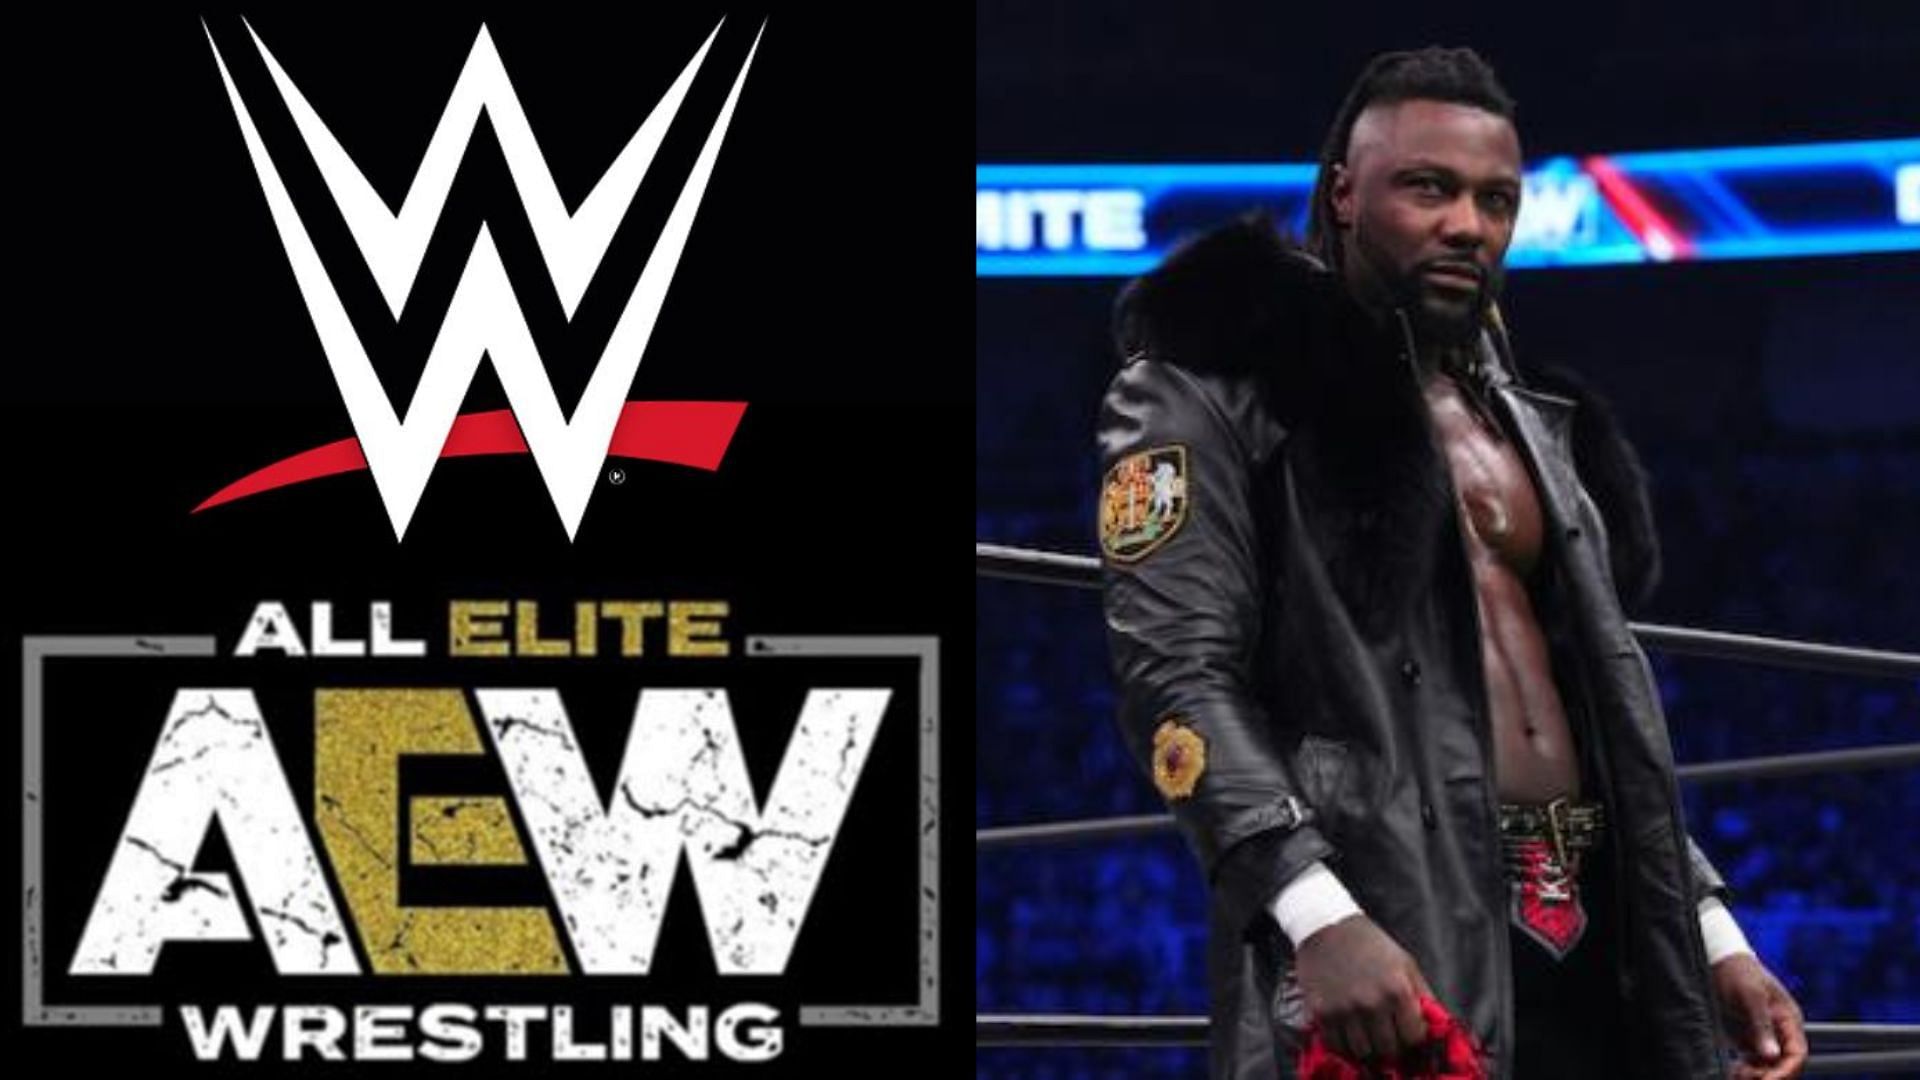 Swerve Strickland is former AEW Tag Team Champion